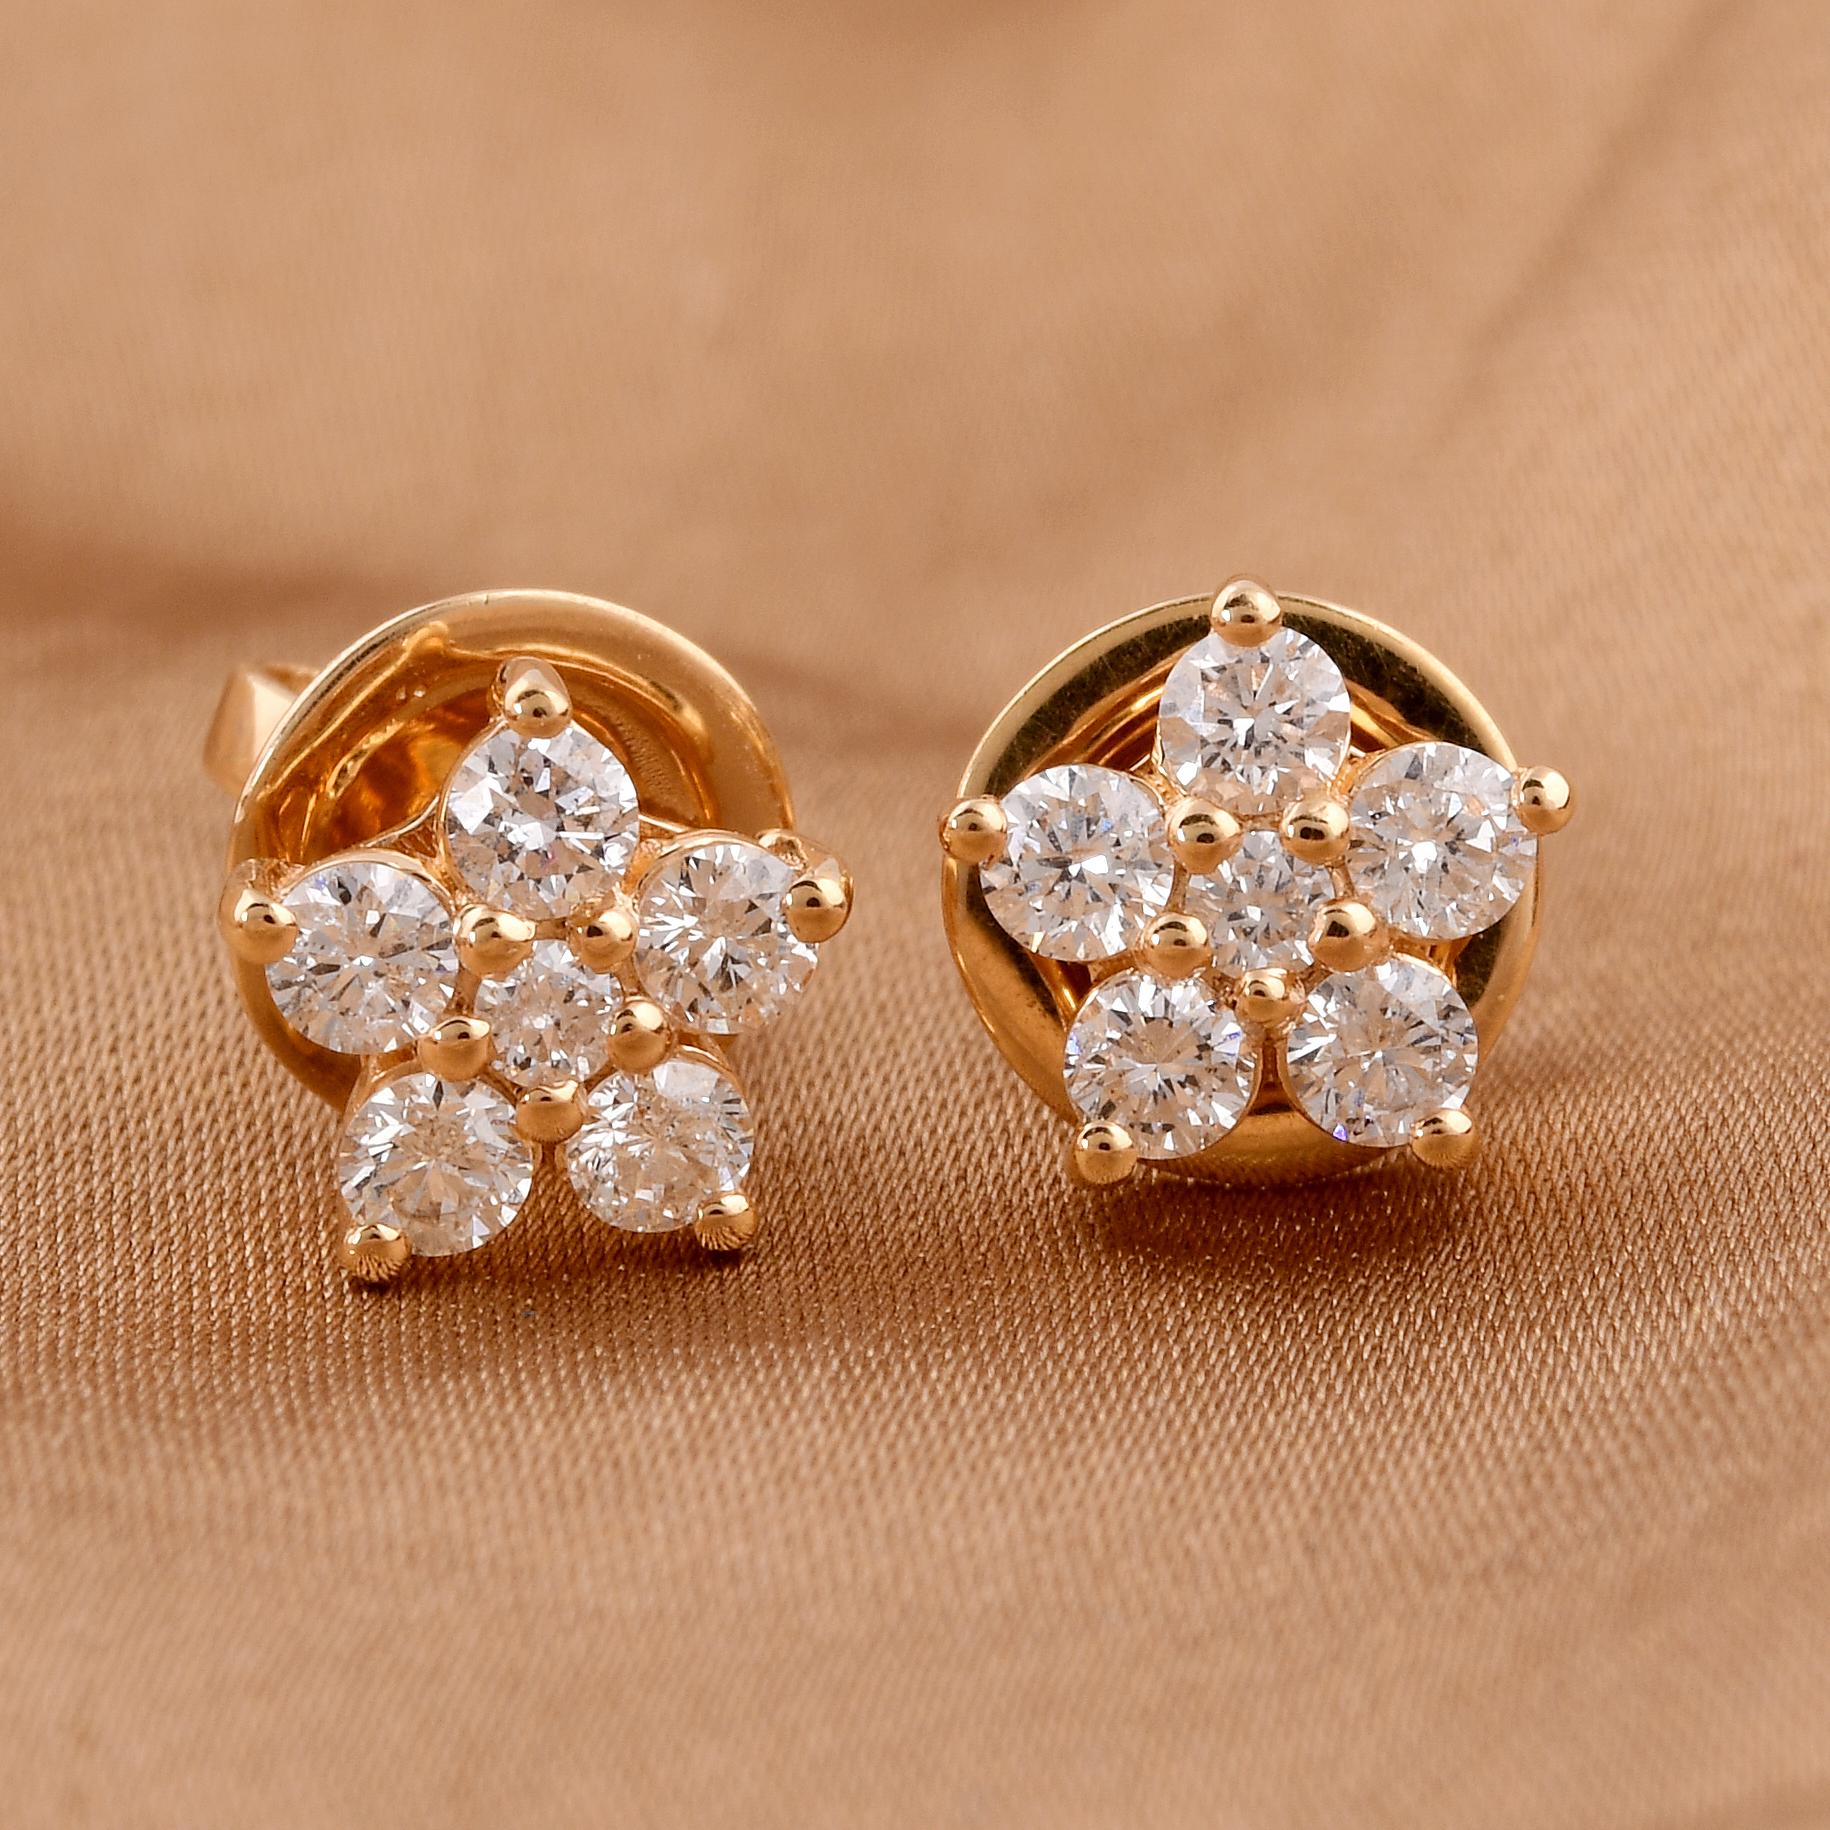 These charming flower stud earrings are a delightful addition to any jewelry collection. Each earring features a cluster of diamonds arranged in the shape of a blooming flower, creating a captivating and feminine design.

Item Code :- SEE-14398